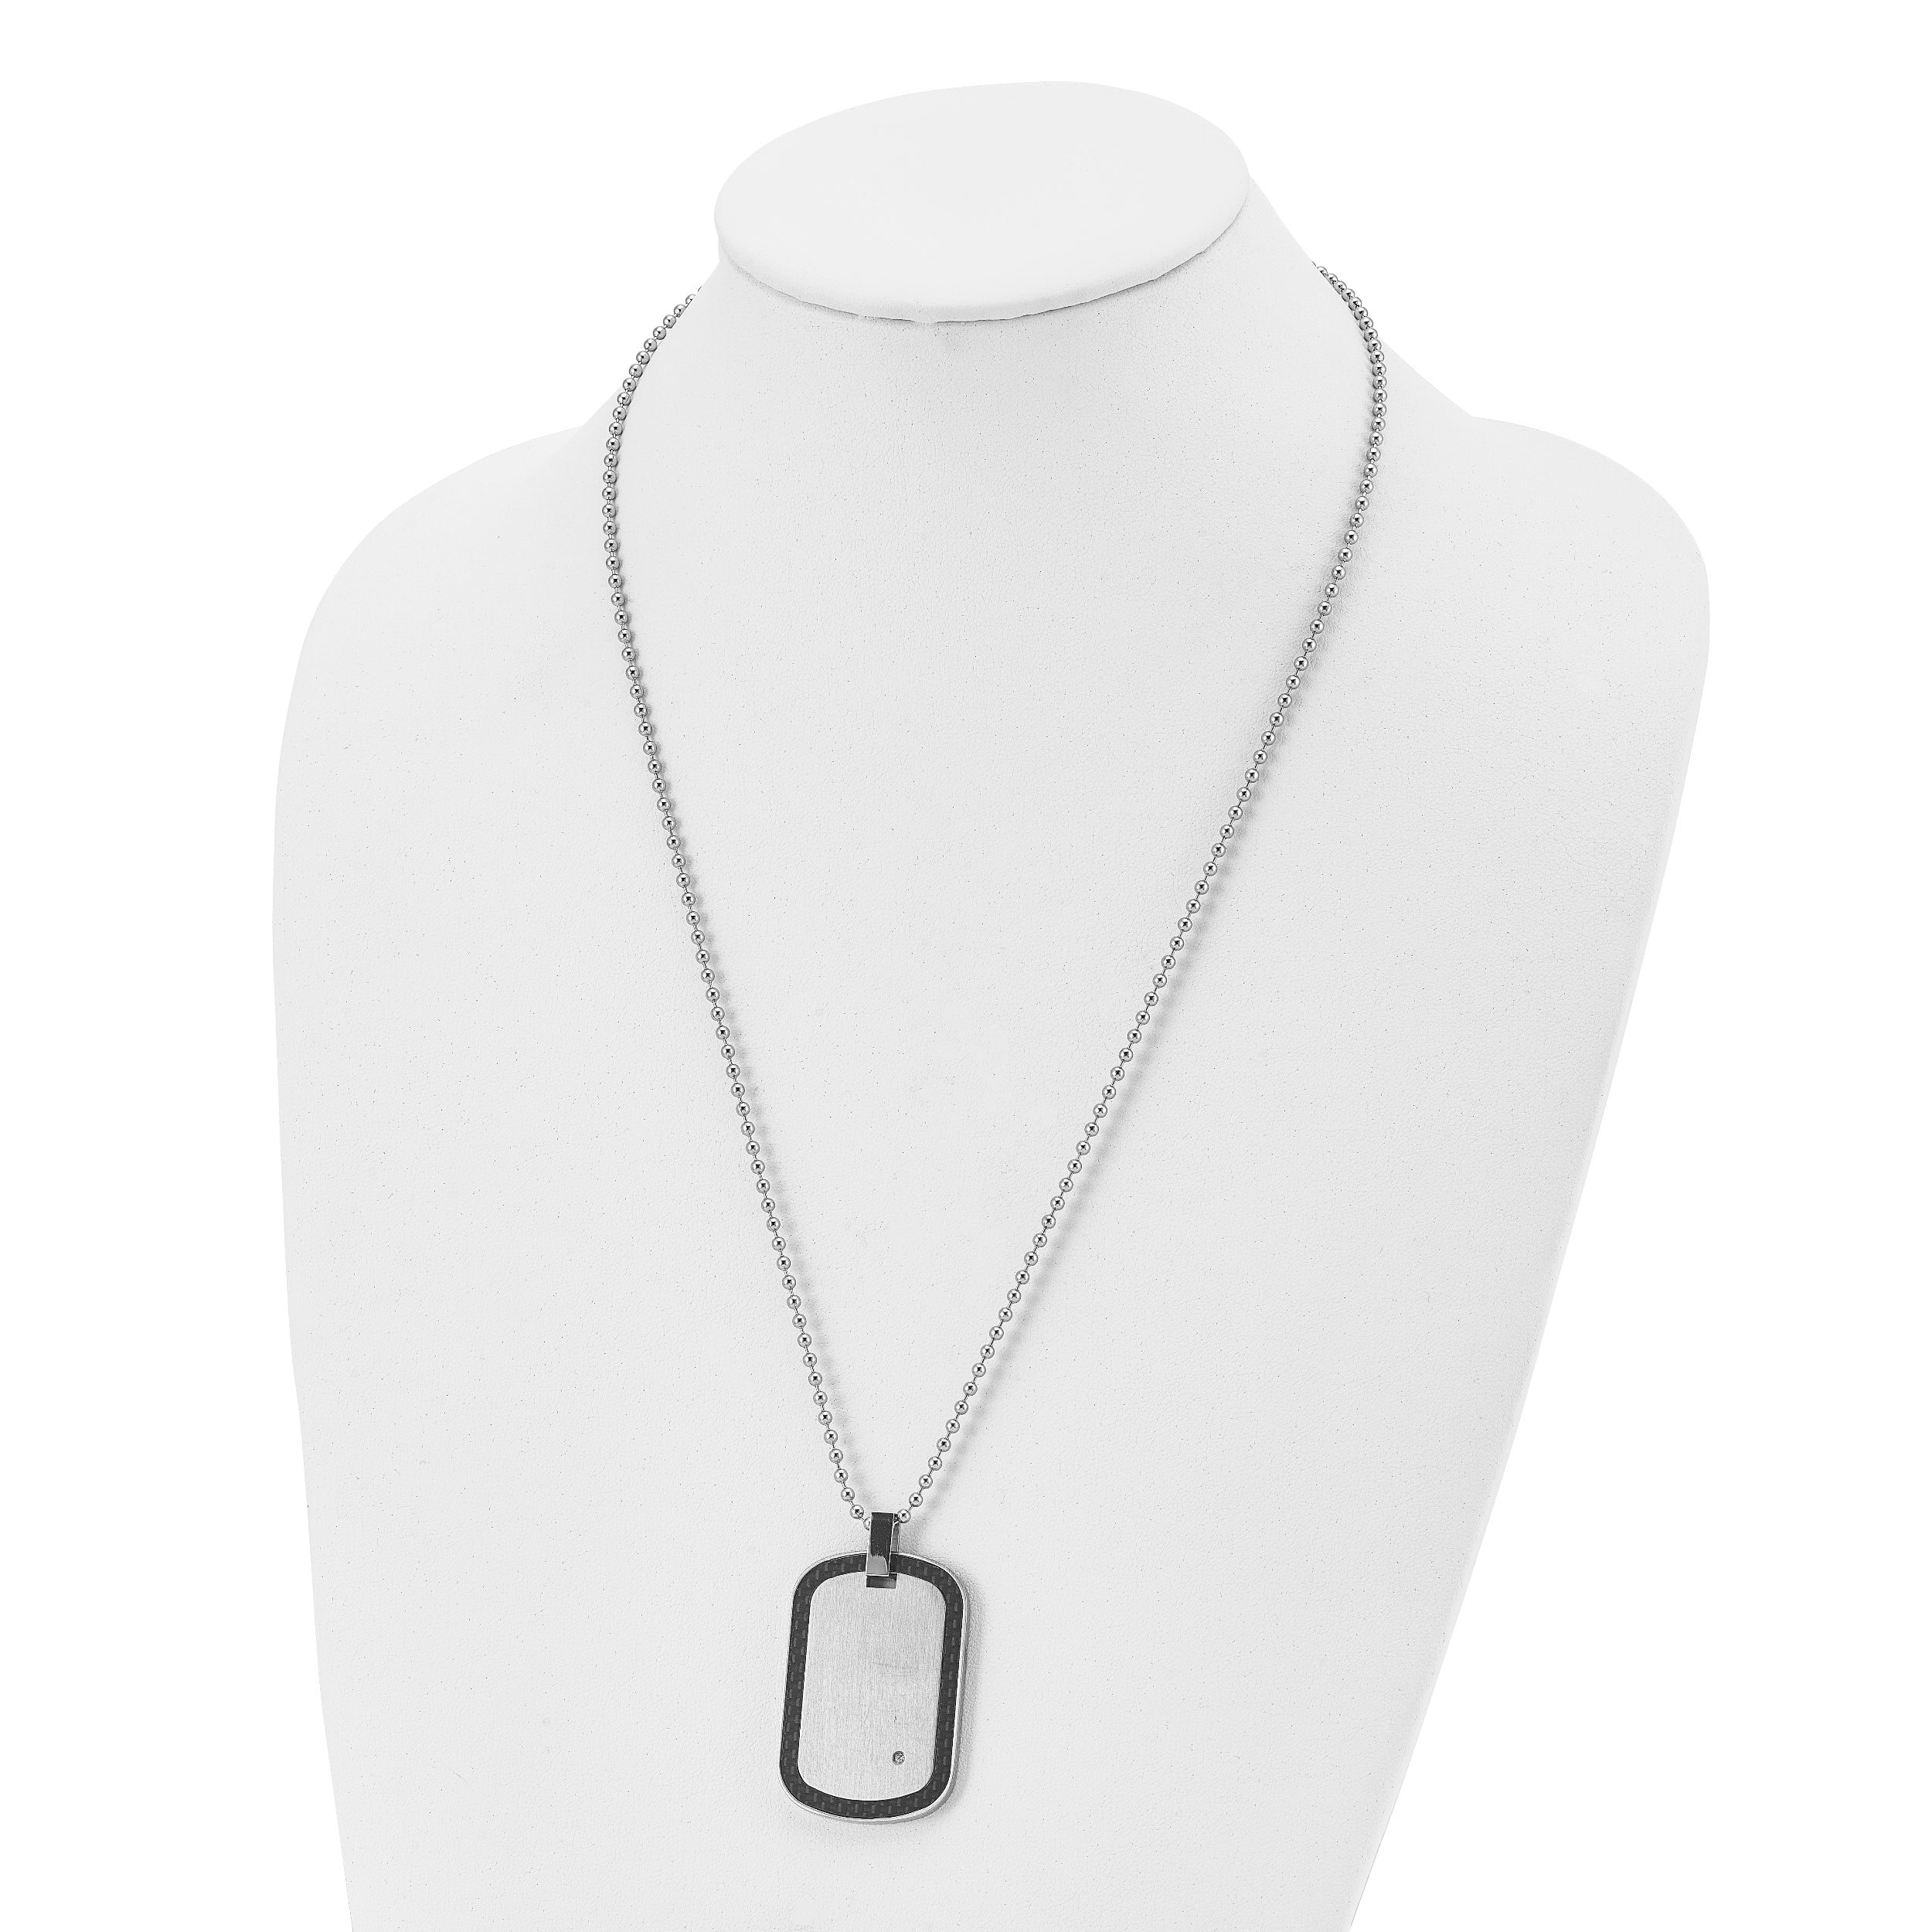 Chisel Stainless Steel Brushed with Black Carbon Fiber Inlay Edges and .01carat Diamond Dog Tag on a 24 inch Ball Chain Necklace